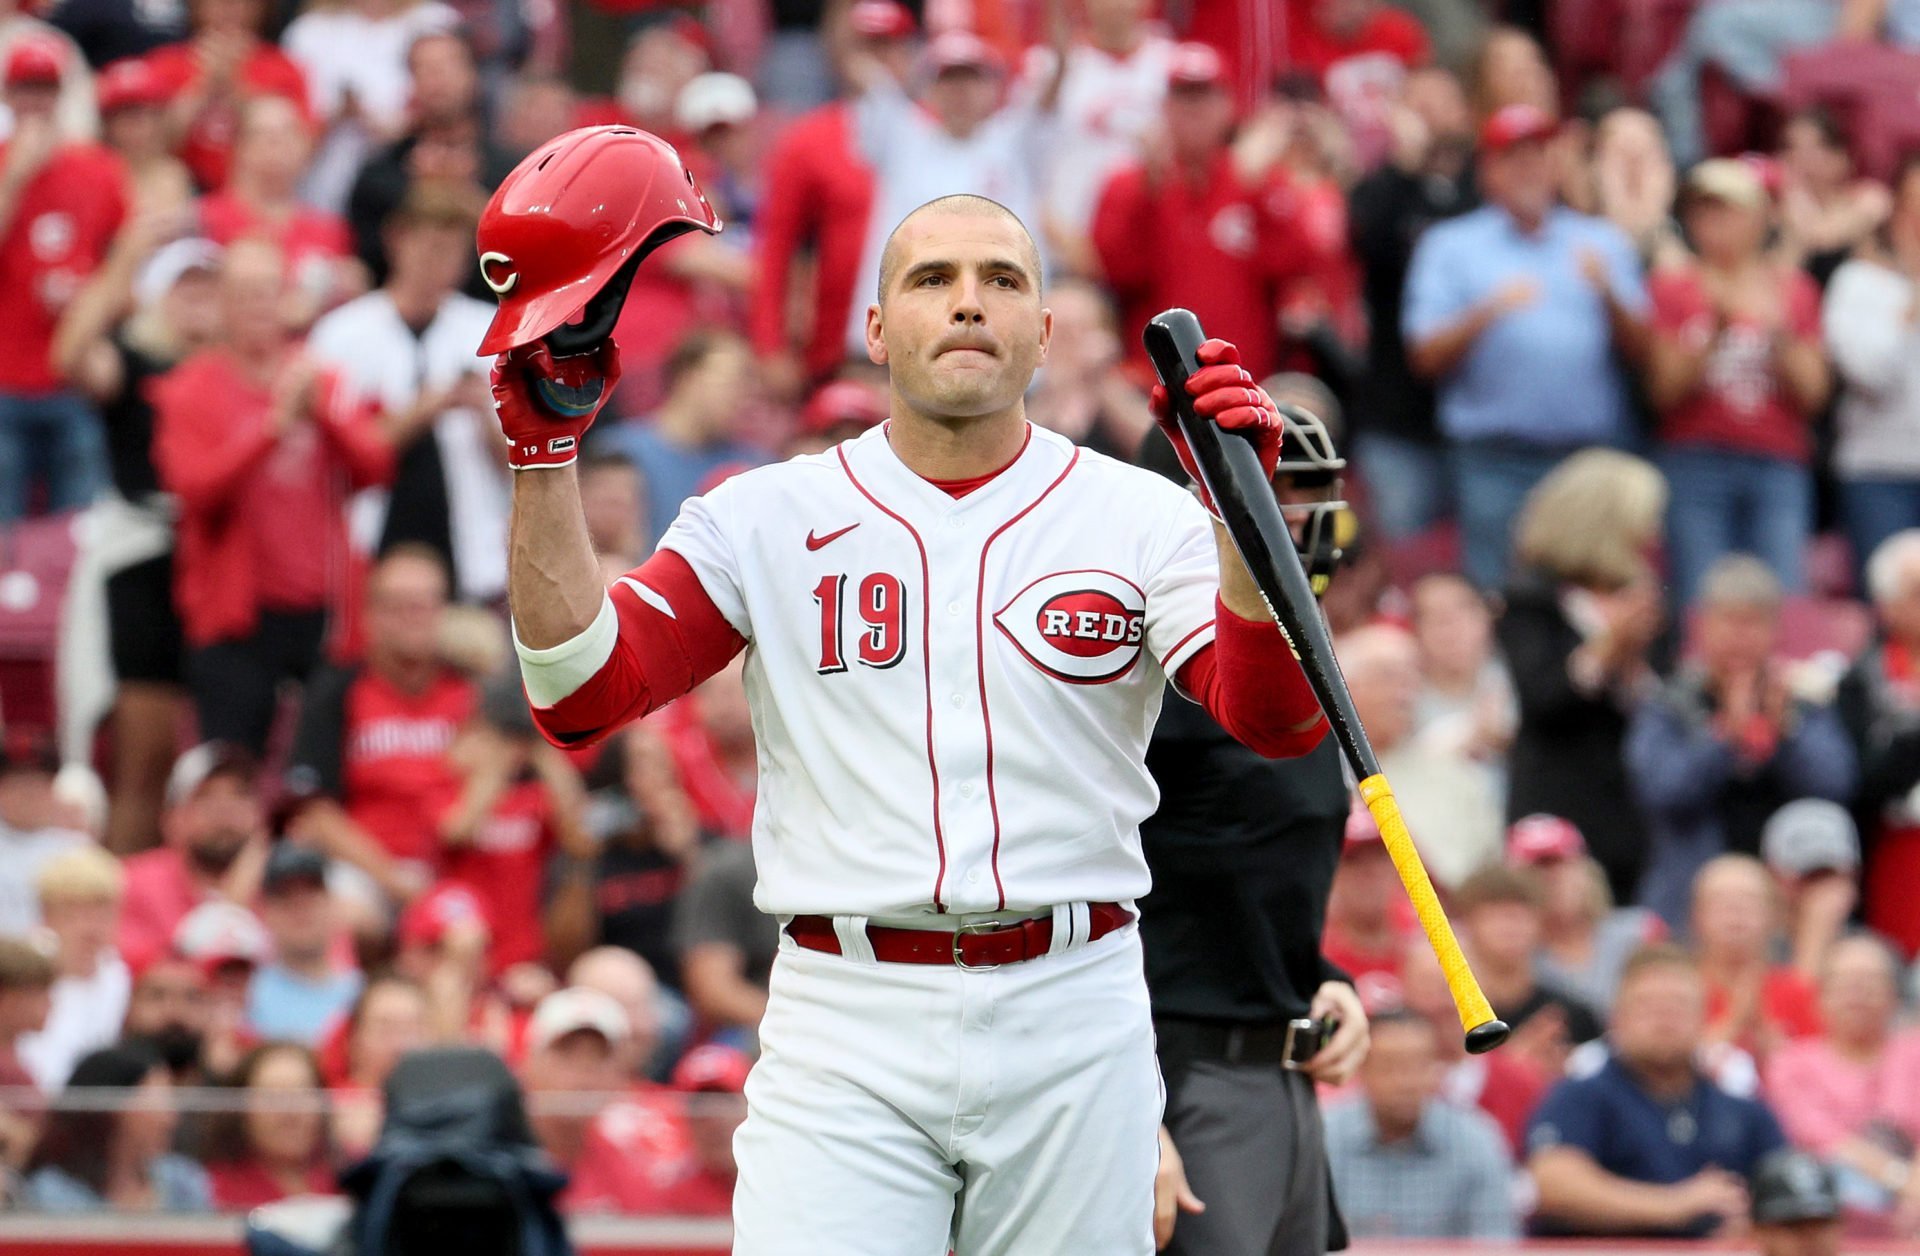 Fans declare 'Joey Votto still bangs' as Reds star returns after 10-month layoff